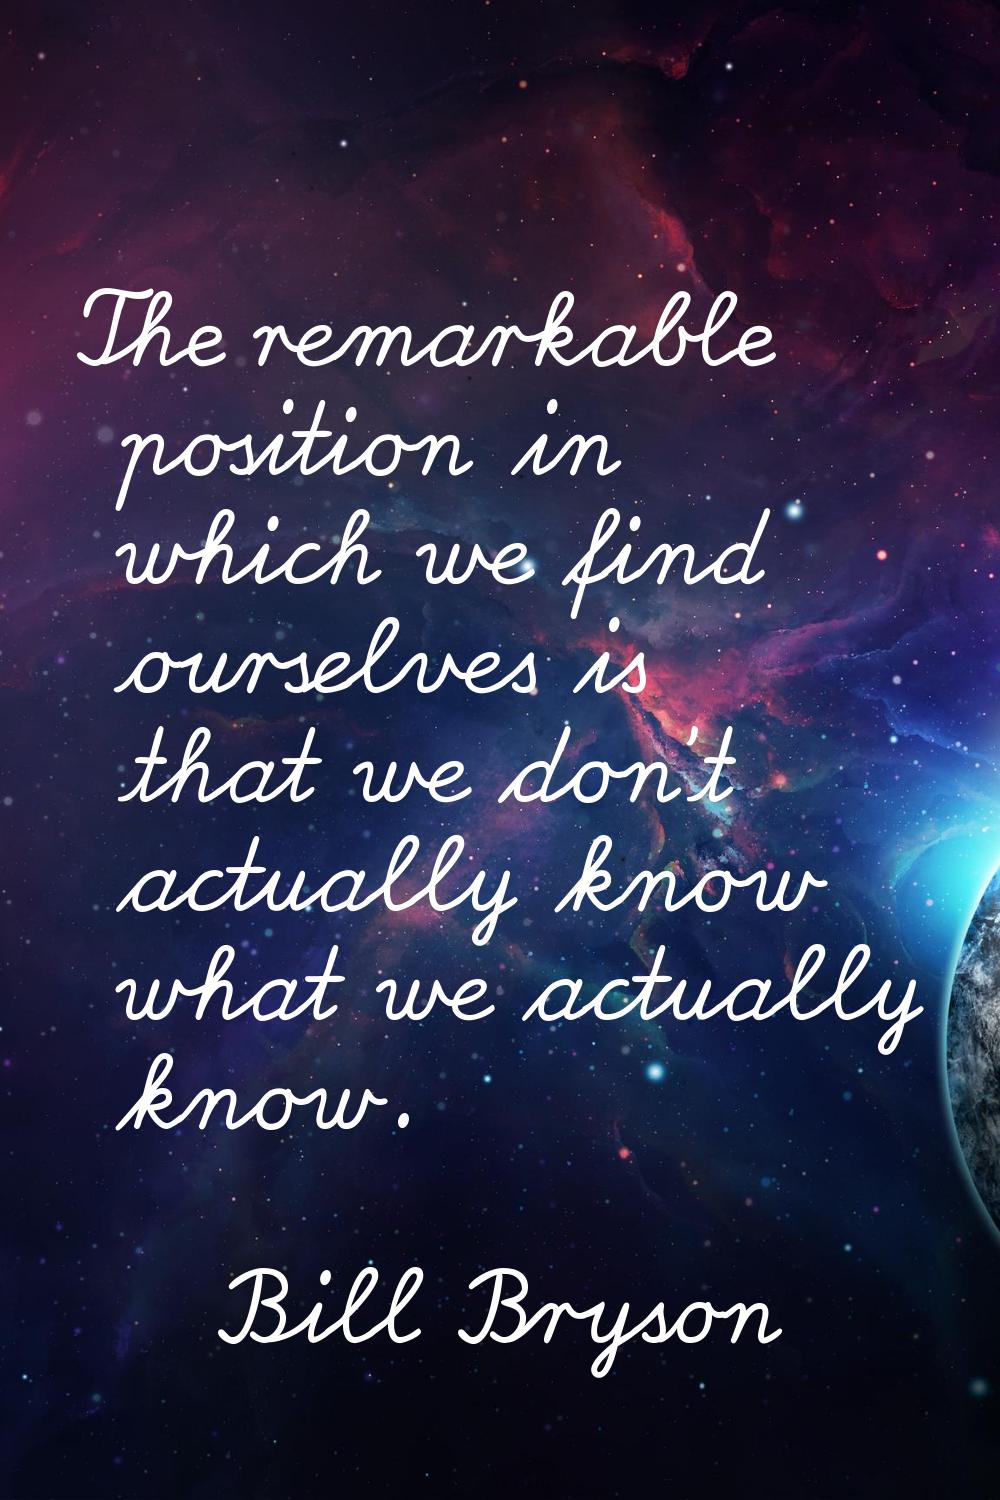 The remarkable position in which we find ourselves is that we don't actually know what we actually 